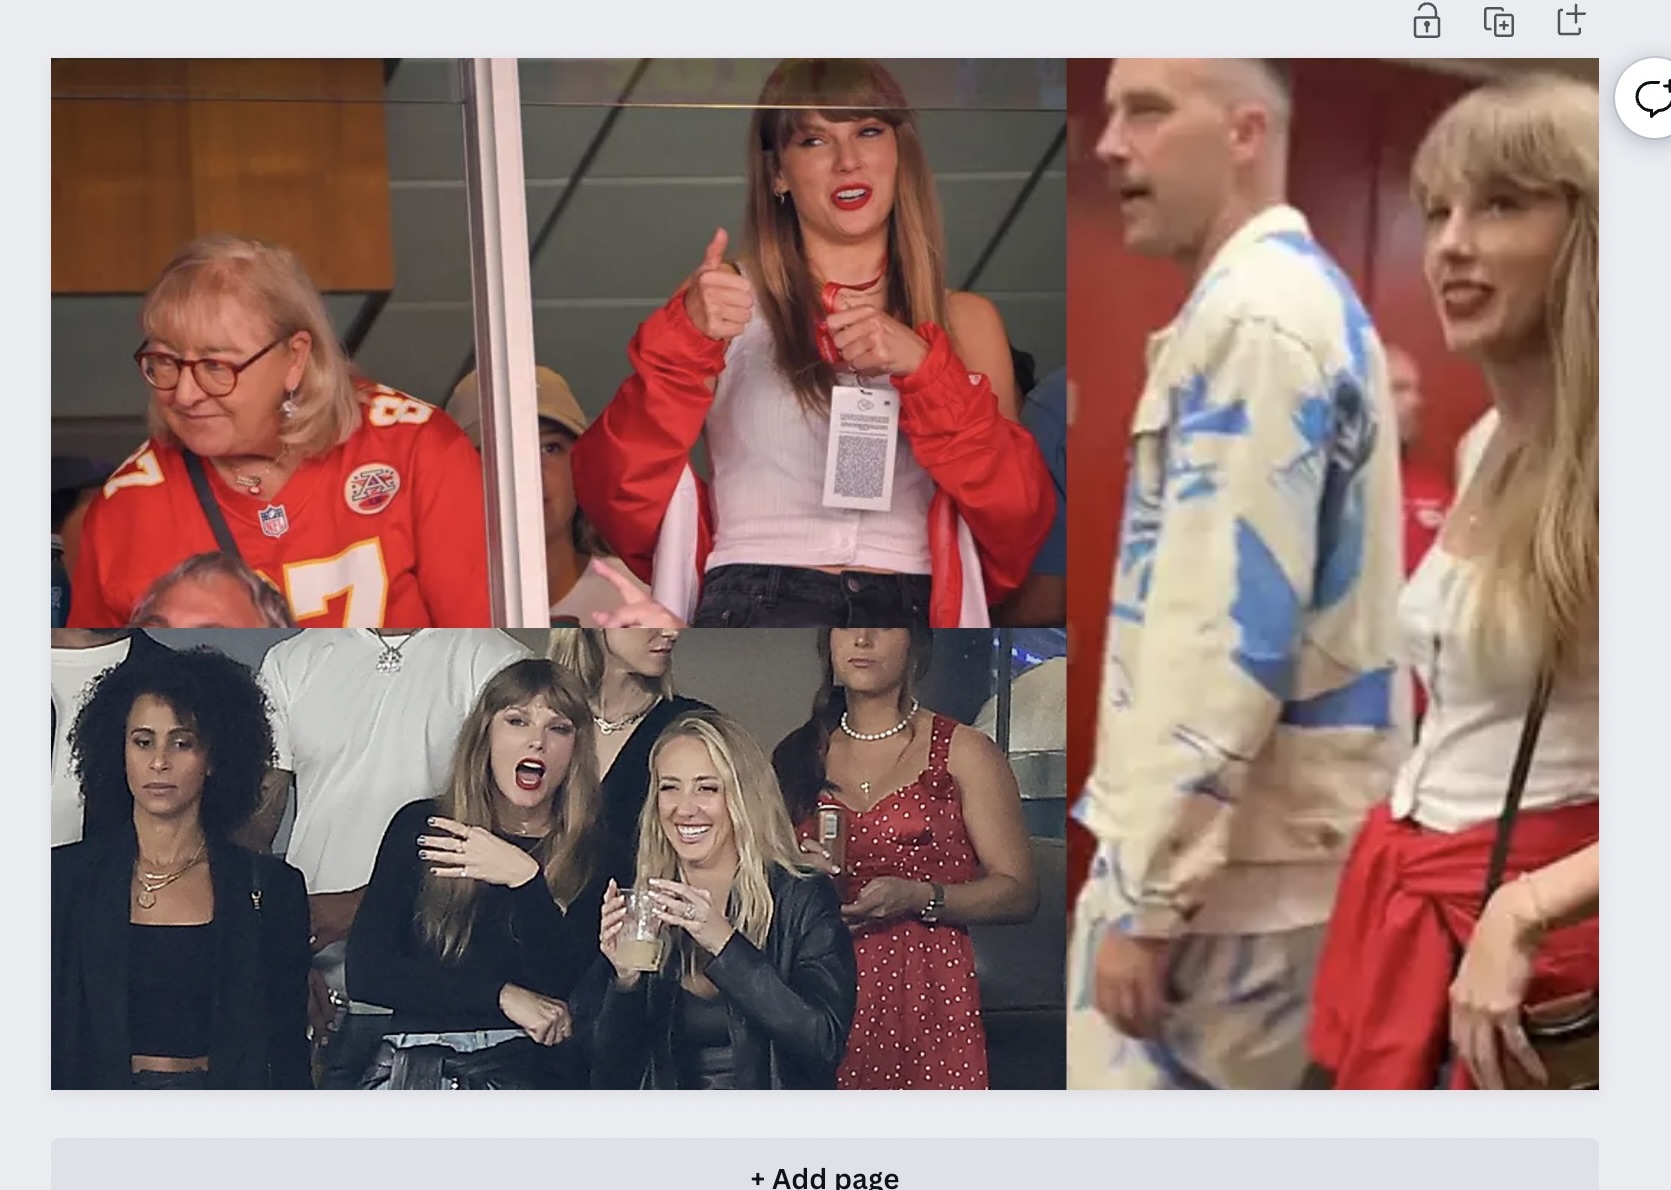 Taylor Swift first attended the Chief’s game against the Bears with Kelce’s mom, the next week she came from New York and brought celebrity friends Blake Lively, Ryan Reynolds, Sophie Turner, and Sabrina Carpenter